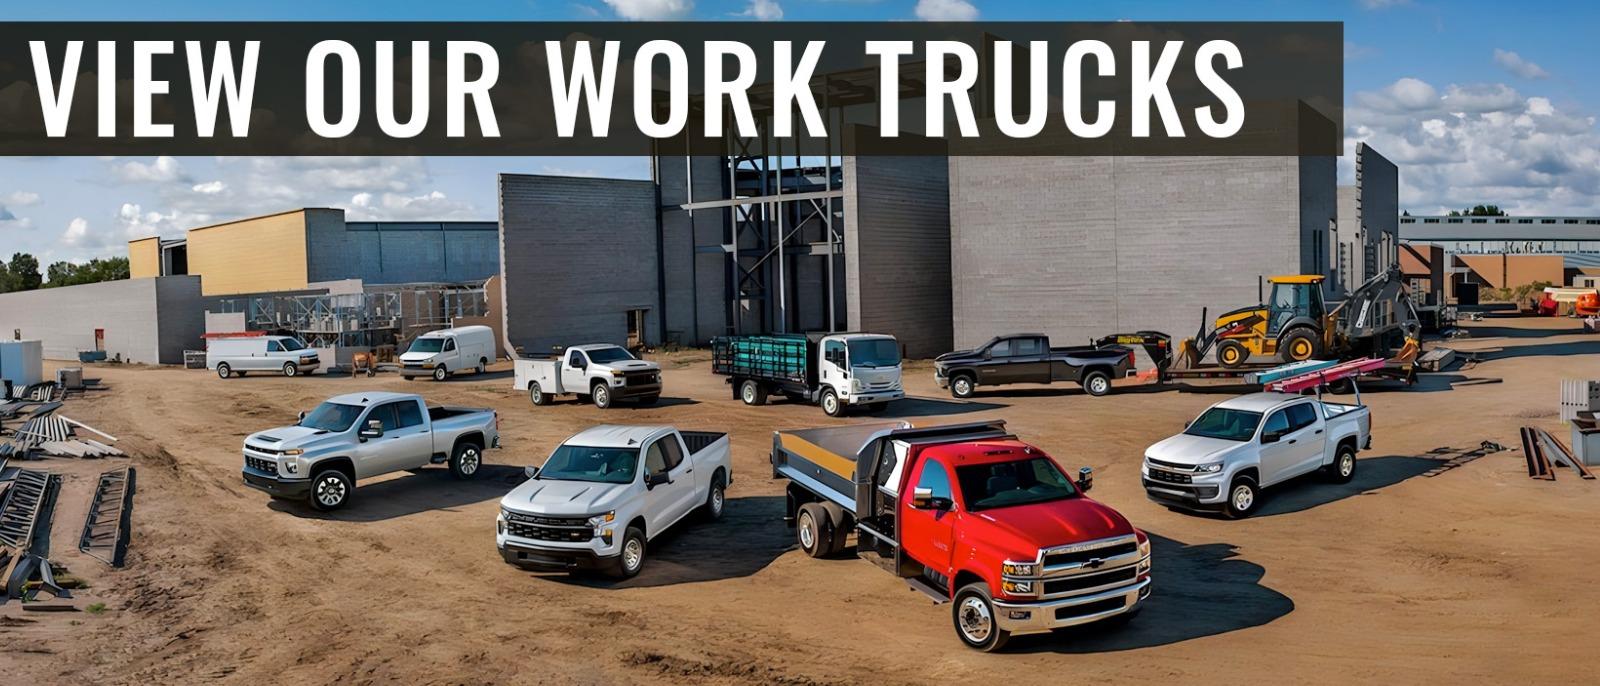 VIEW OUR WORK TRUCKS